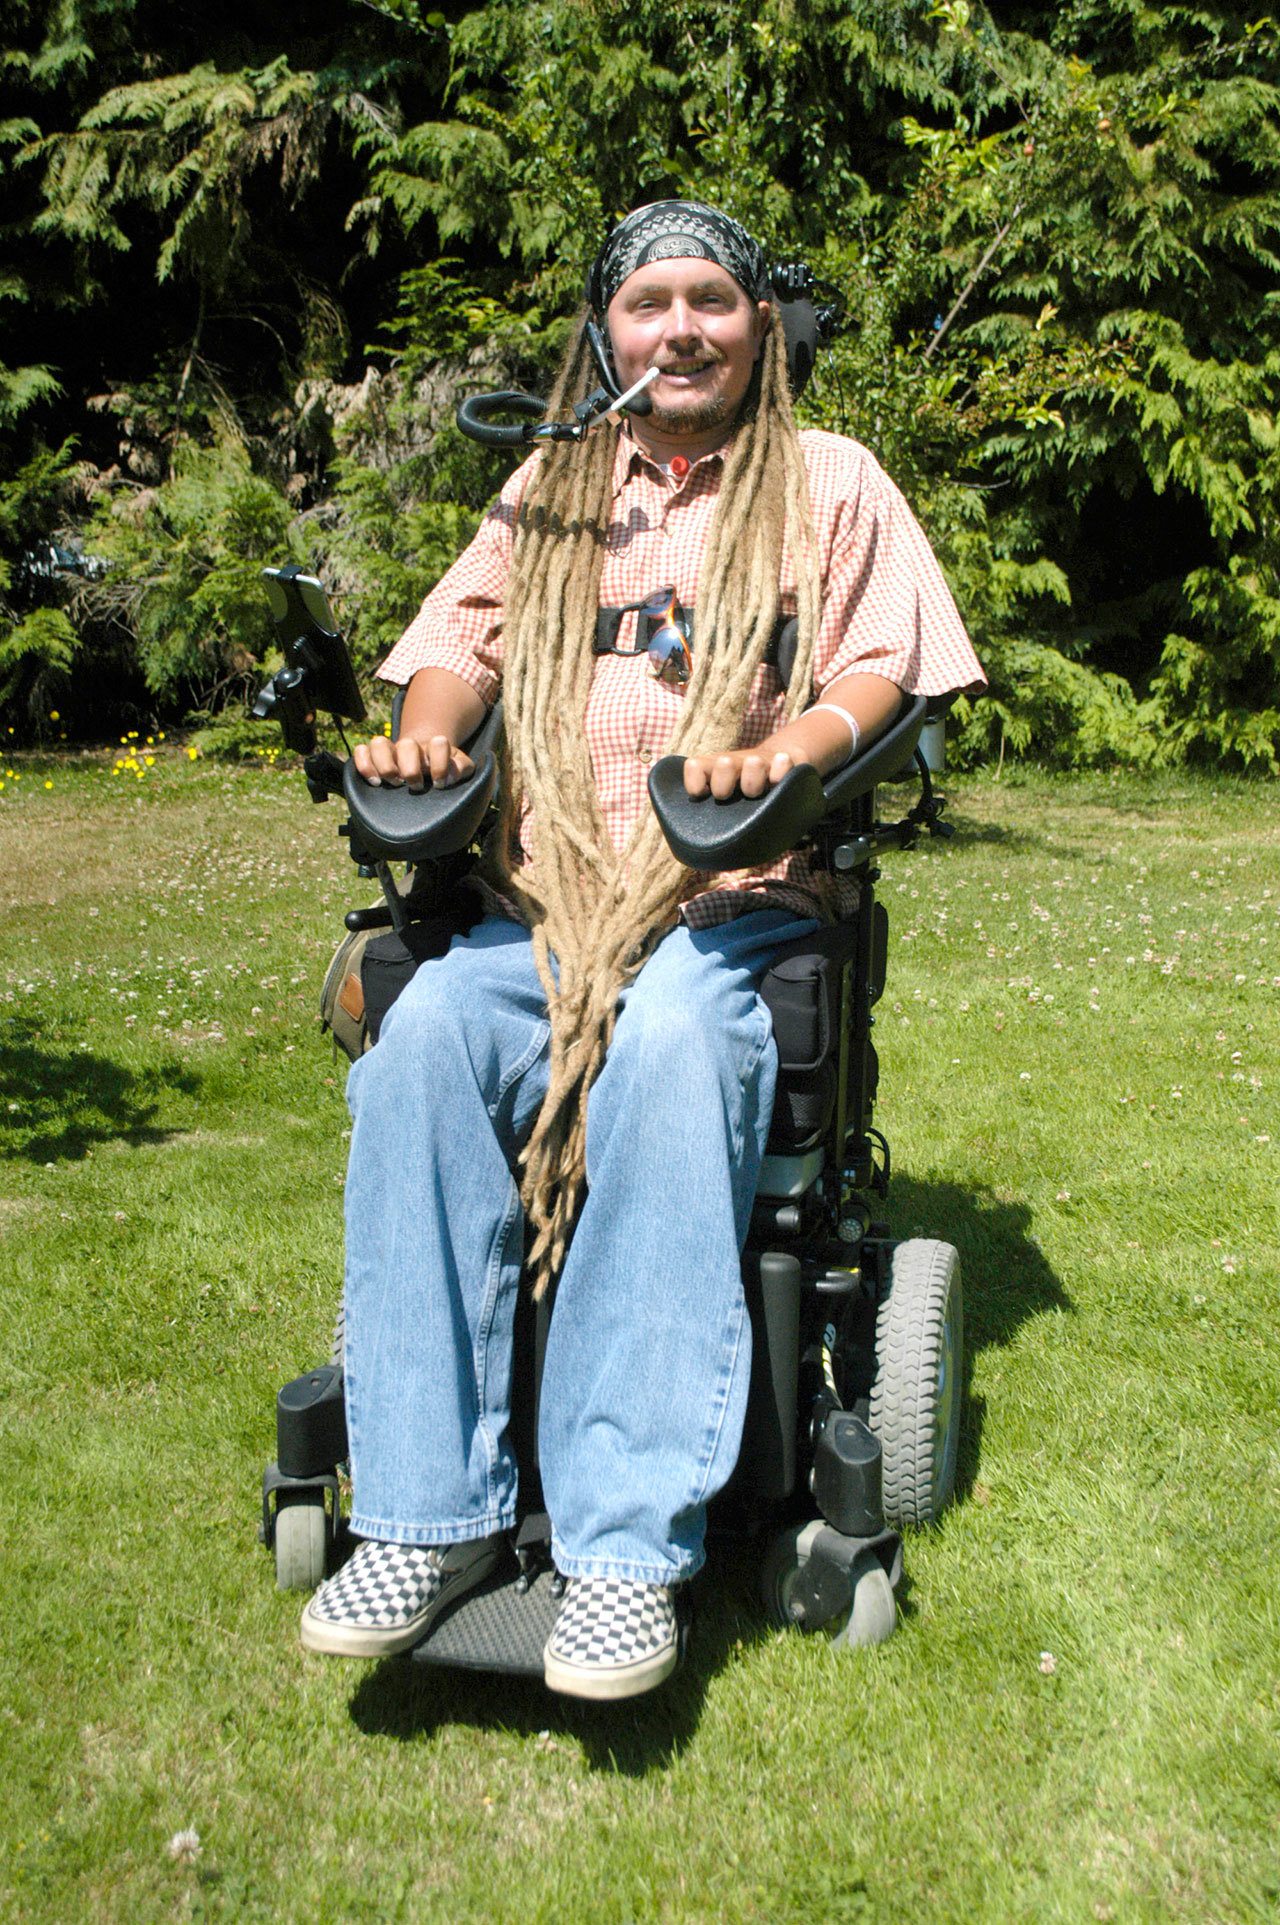 Chris McDaniel/Peninsula Daily News                                Ian MacKay, seen here, this month will be taking his motorized wheelchair on a 300 mile journey along Washington state’s bike paths and trails - starting in Victoria, British Columbia and ending in Portland, Oregon to raise awareness about the need by wheelchair bound people for access to public trails.